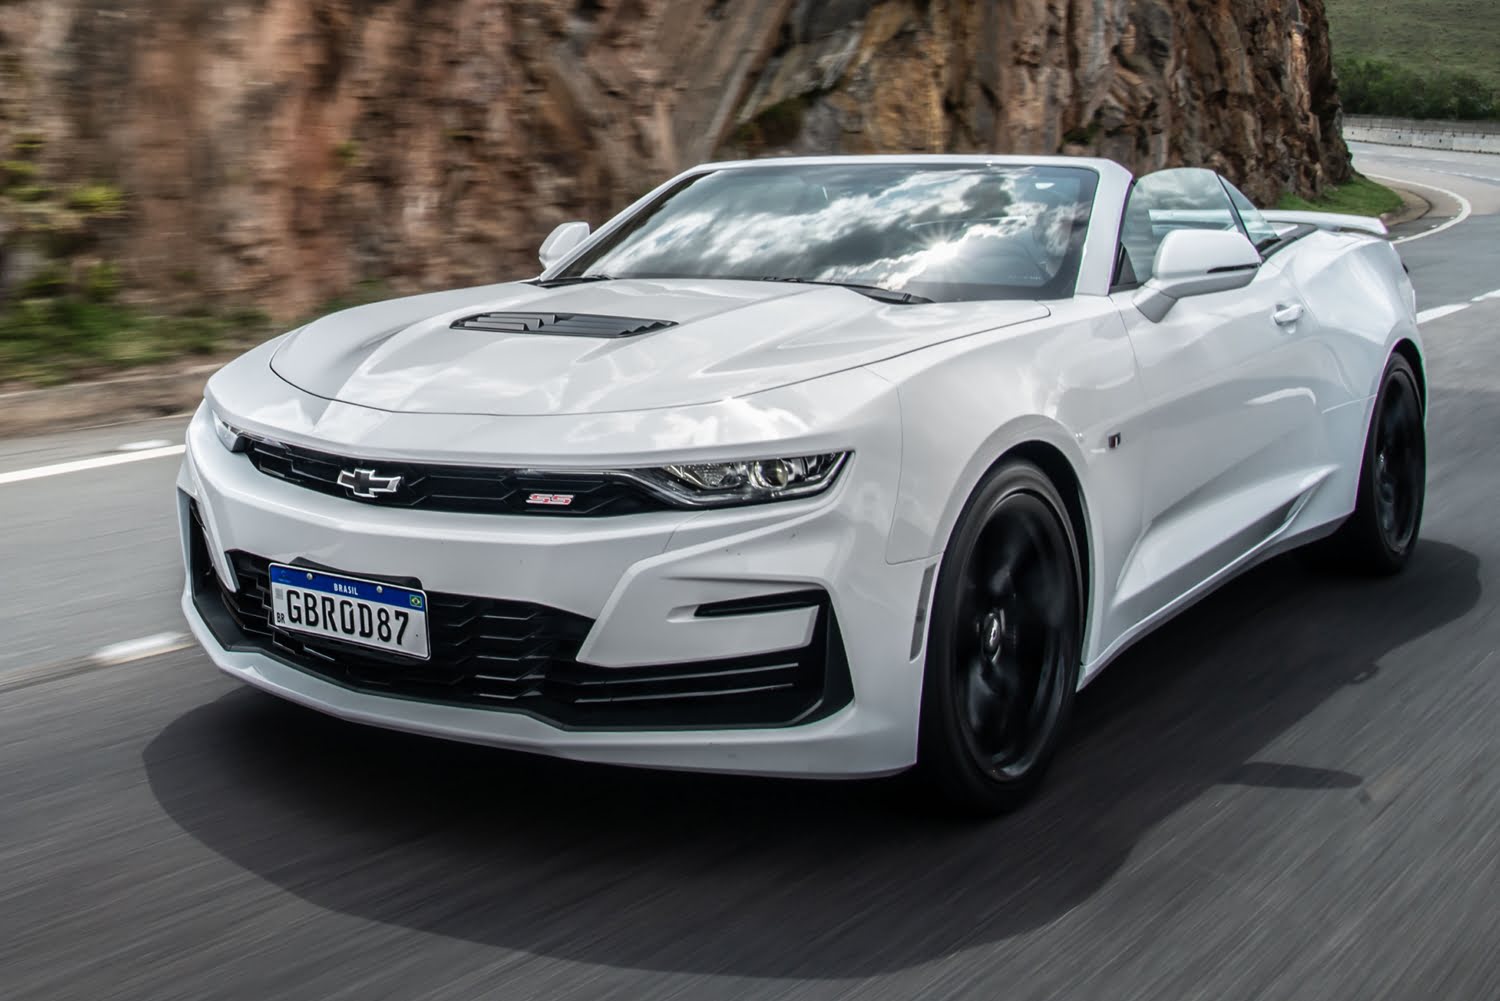 Retail Chevy Camaro Convertible Sales Topped Ford Mustang